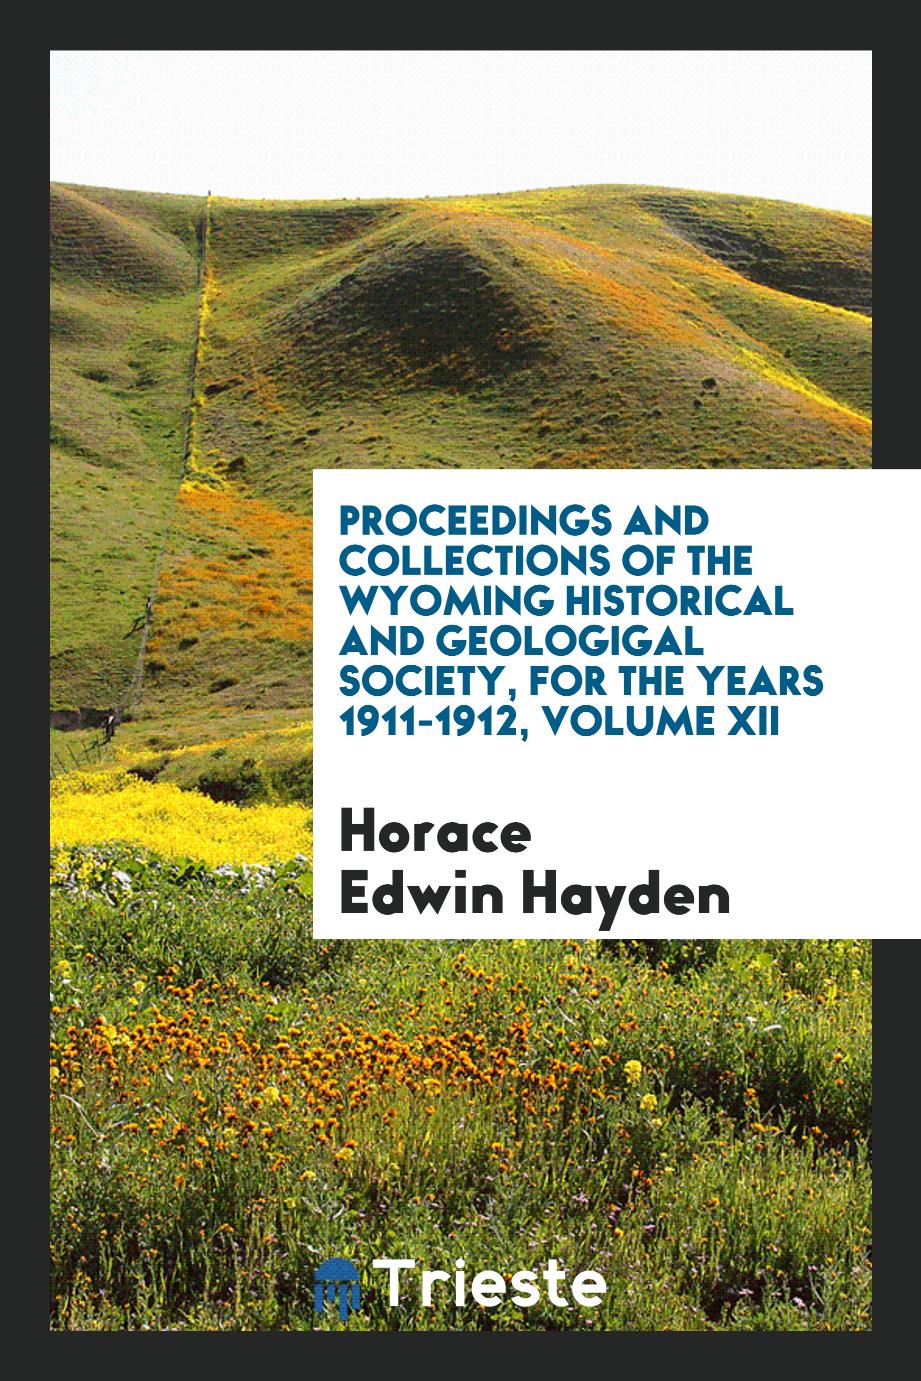 Proceedings and collections of the wyoming historical and geologigal society, for the years 1911-1912, Volume XII